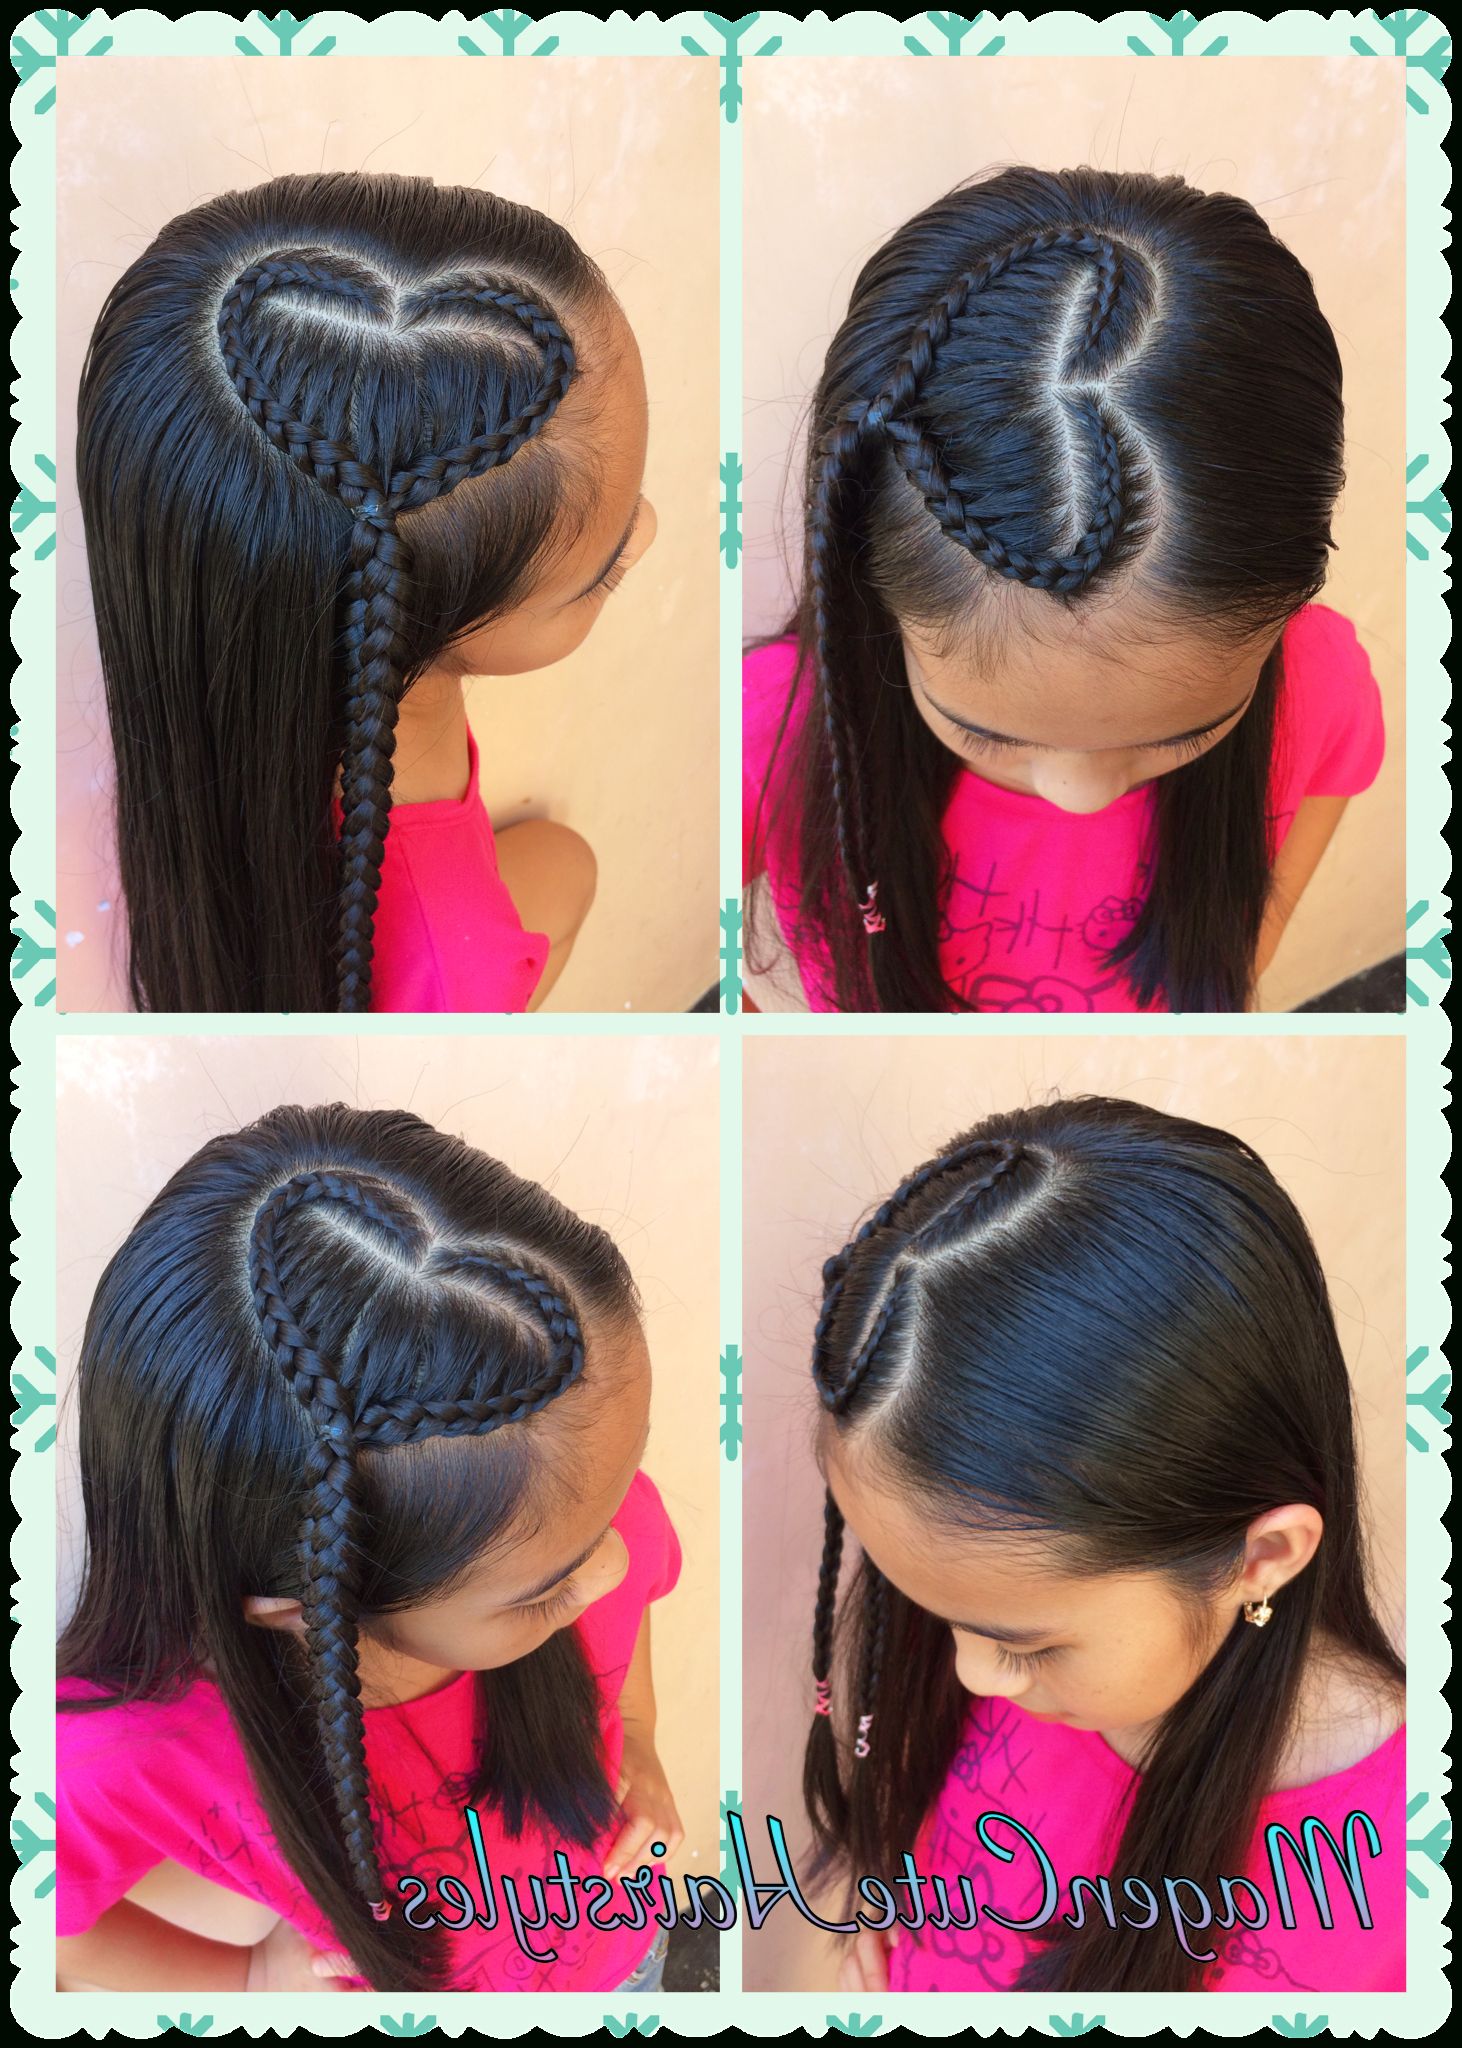 Another Heart Shape Dutch Lace Braid Style Within Best And Newest Heart Shaped Fishtail Under Braid Hairstyles (View 4 of 20)